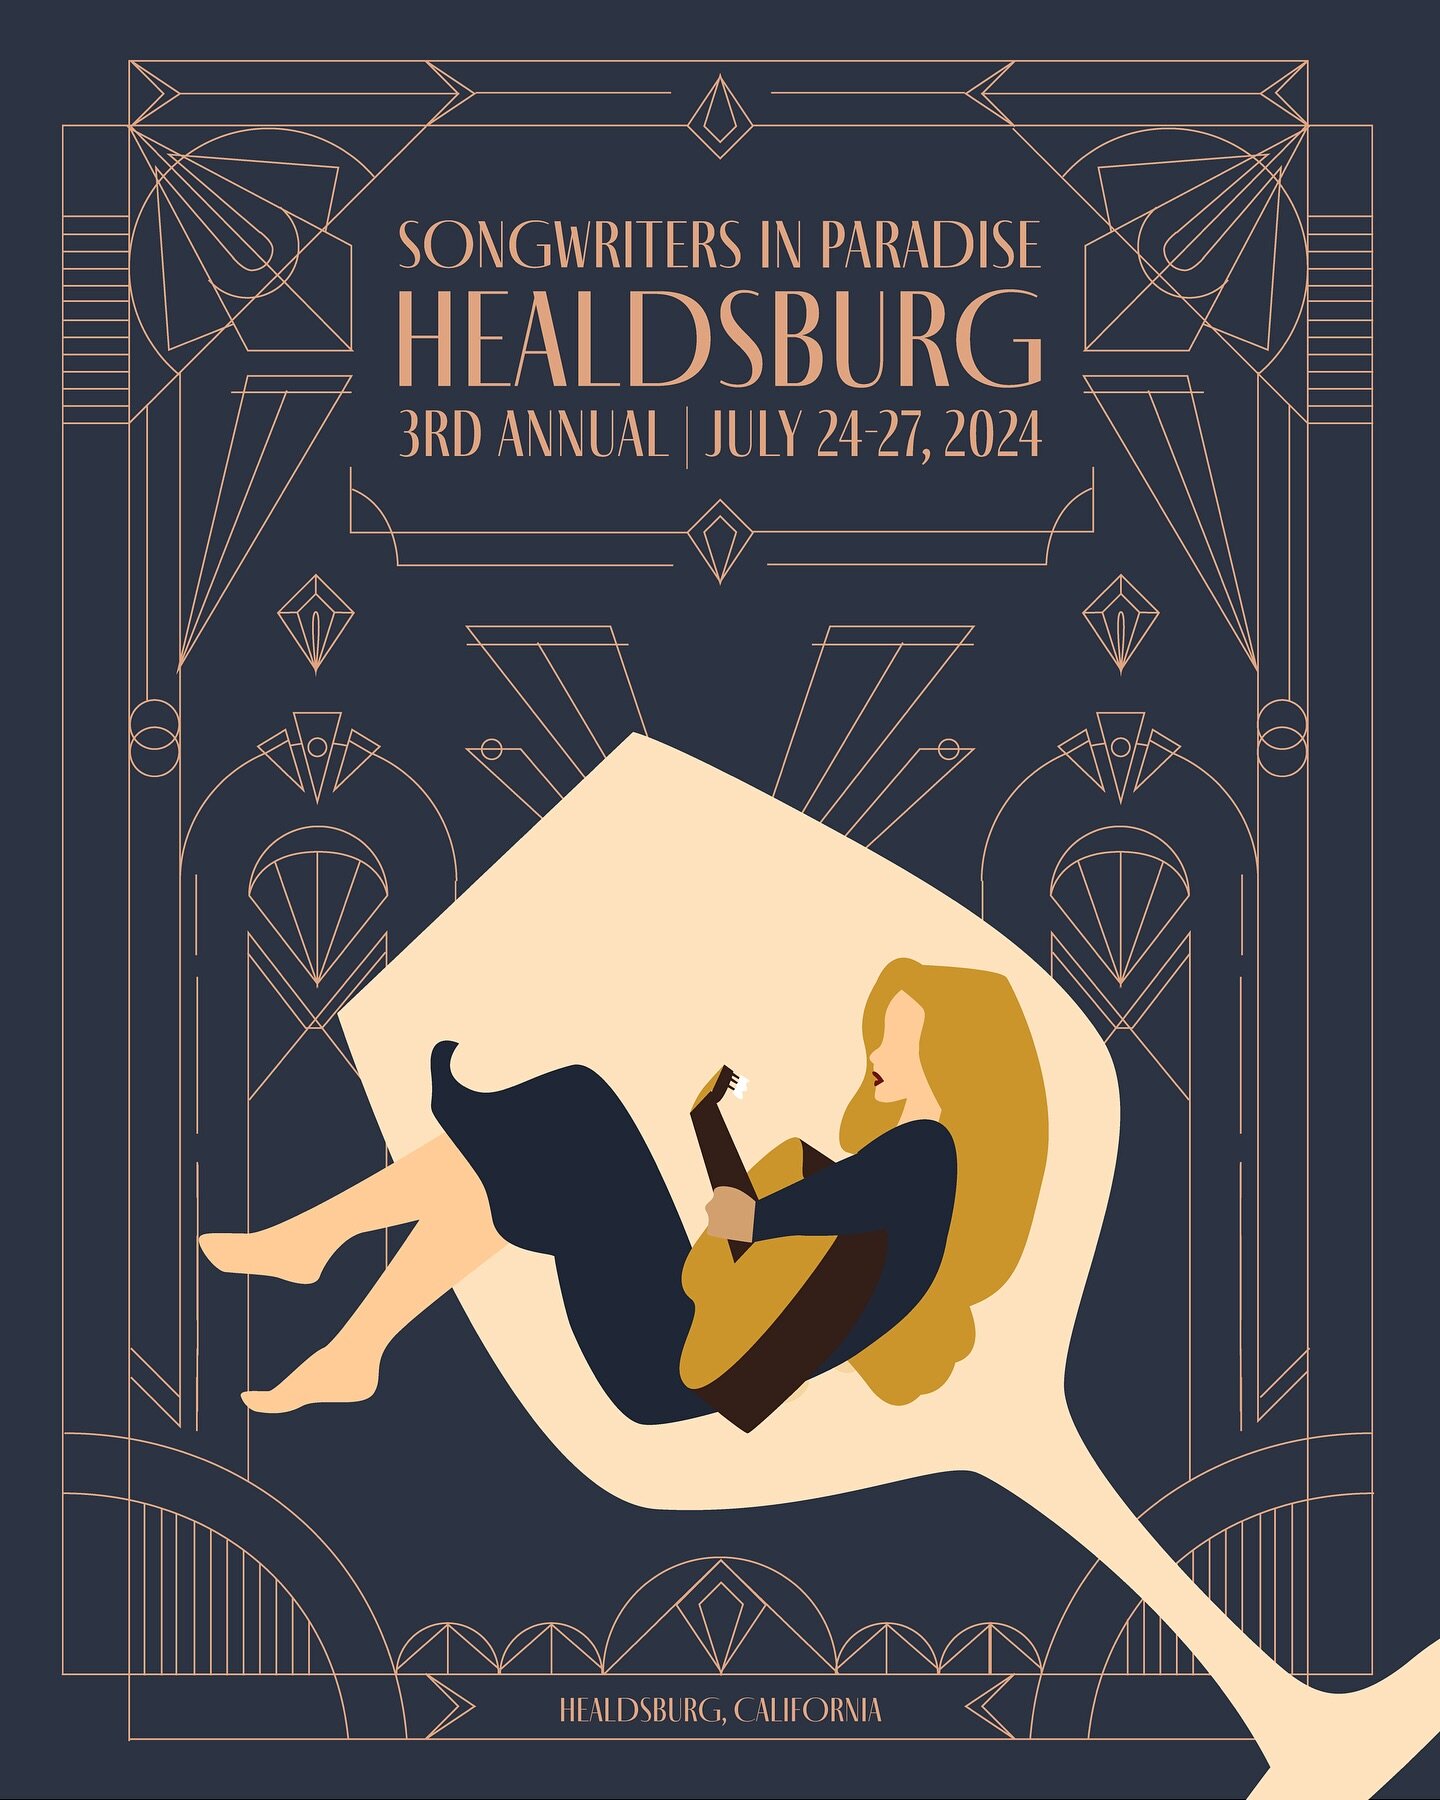 SAVE THE DATES.  Our 3rd Annual SIP HEALDSBURG is happening July 24 - 27.  The wineries, the music, the people &amp; the town are all second to none.  Passes On Sale startin&rsquo; in February!! #siphealdsburg #songwritersinparadise #healdsburg